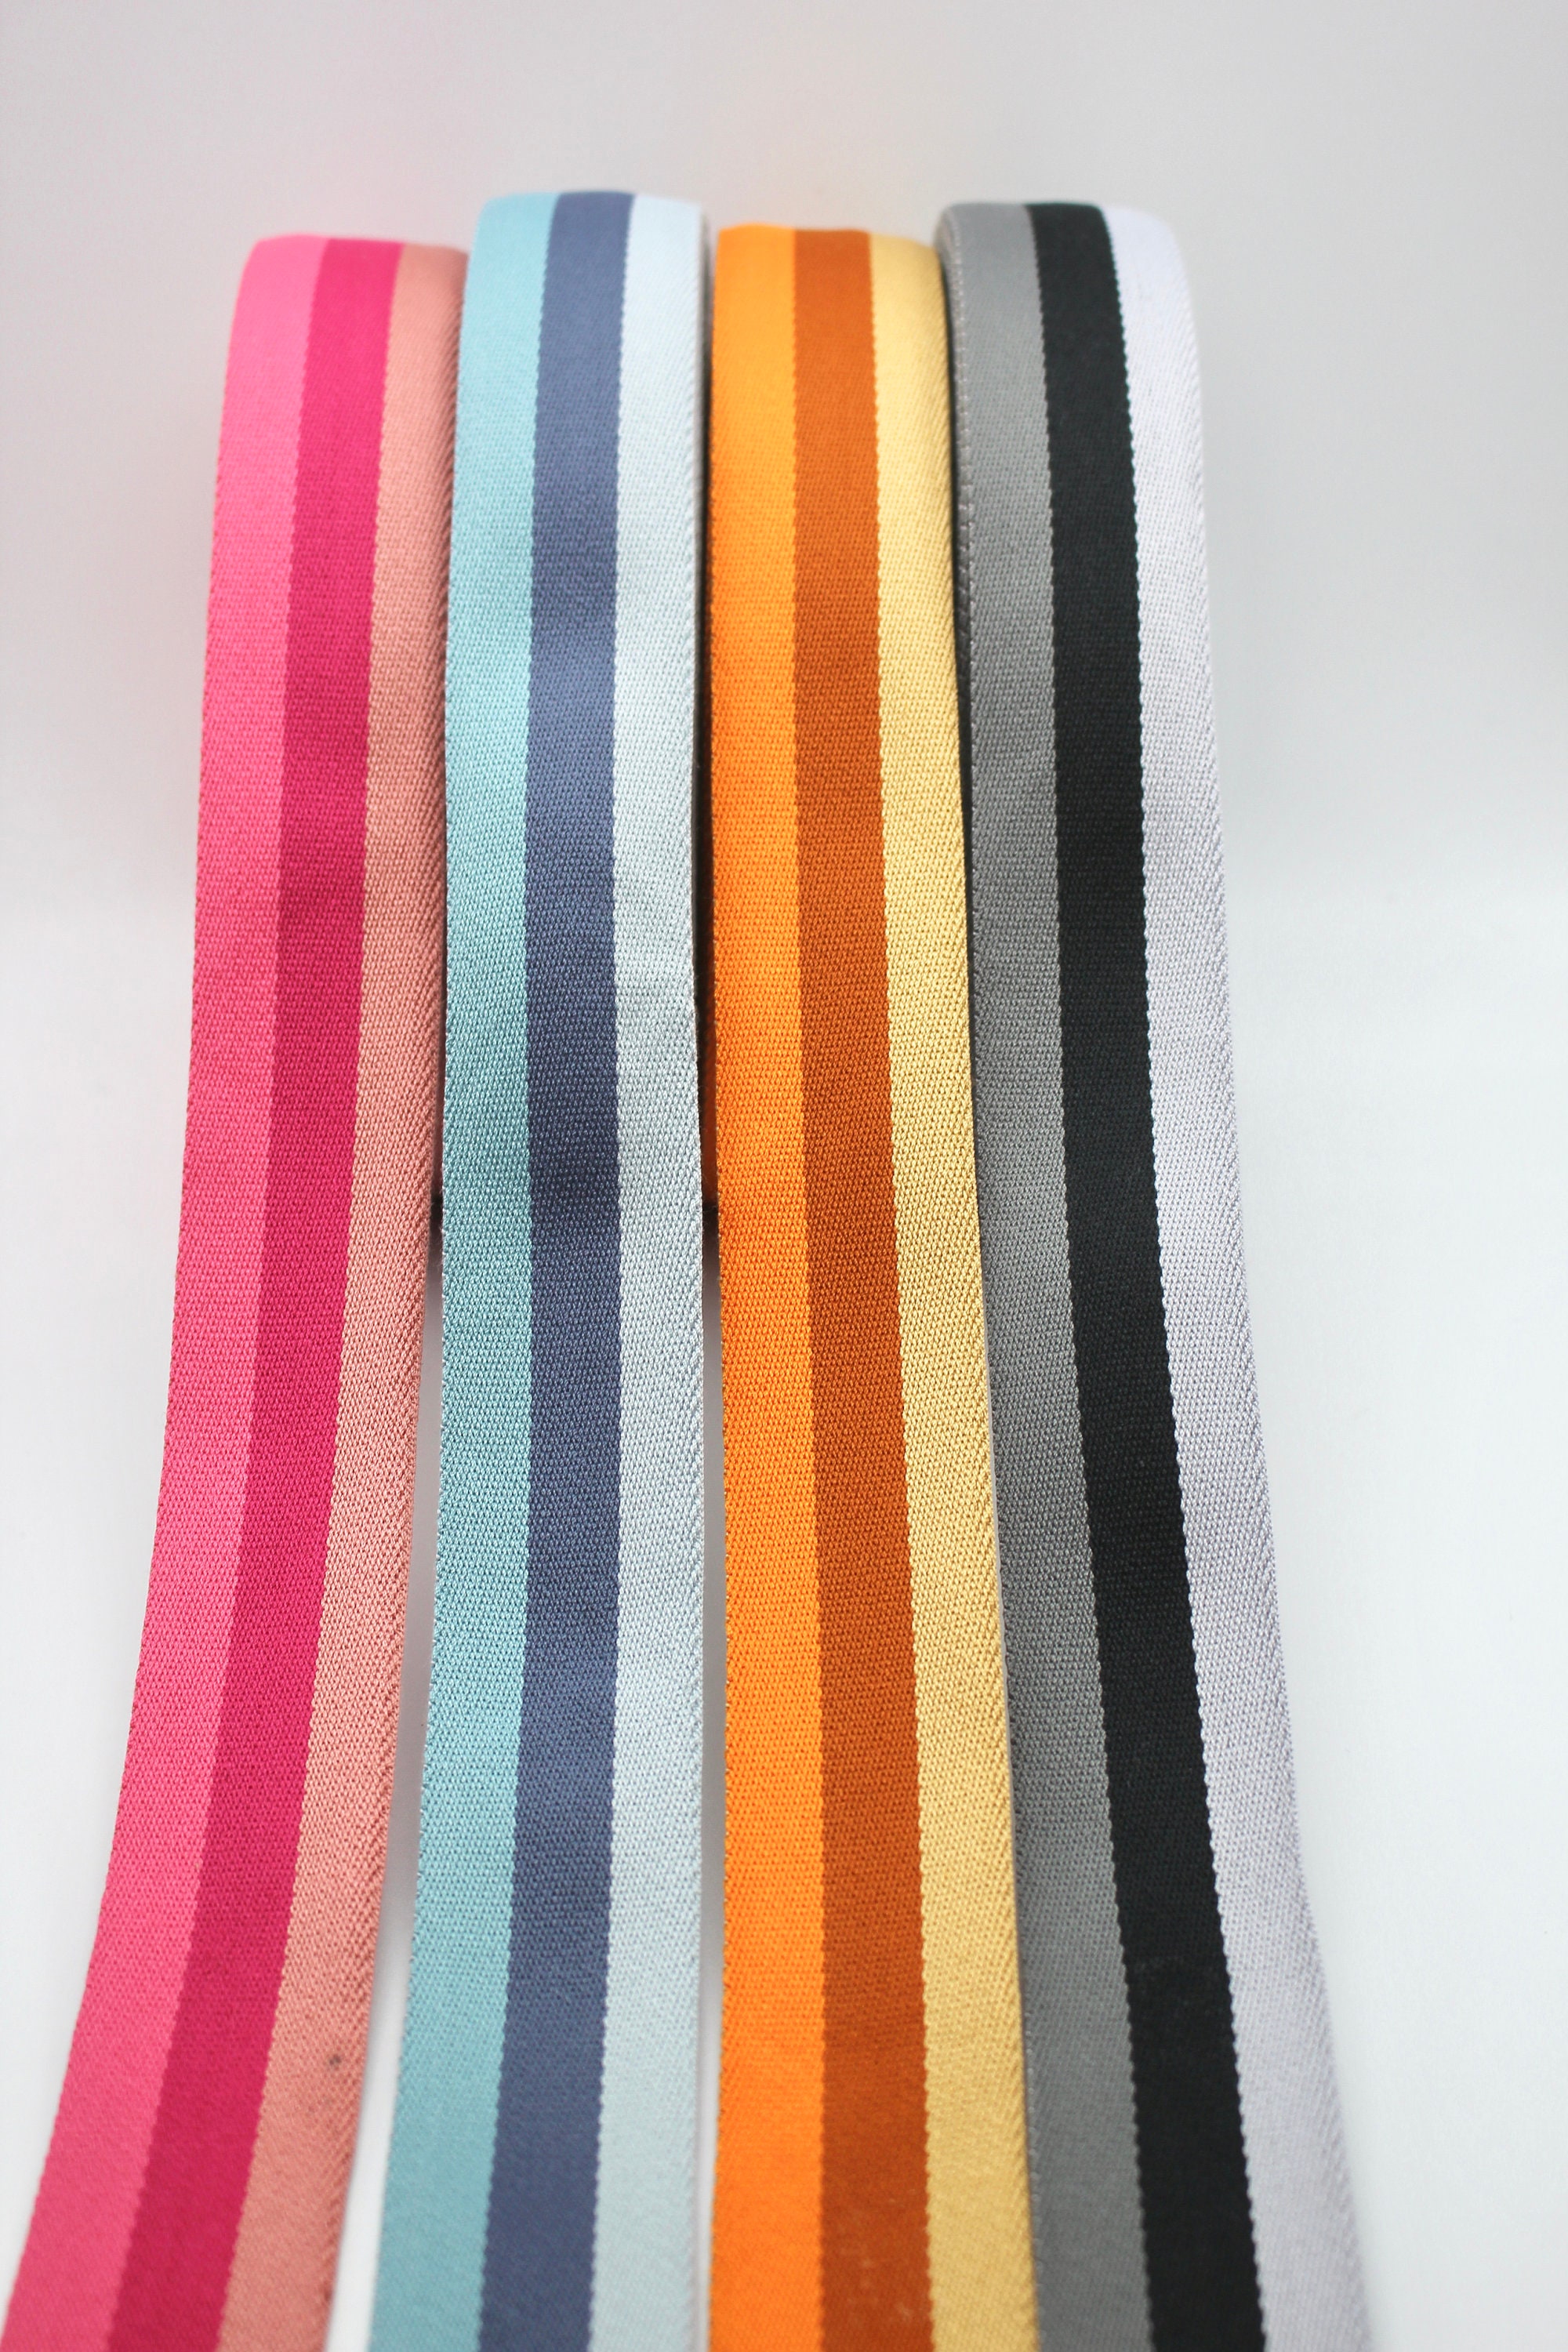 Webbing Double-sided Stripes: 40mm Wide Bag Strapping. Various